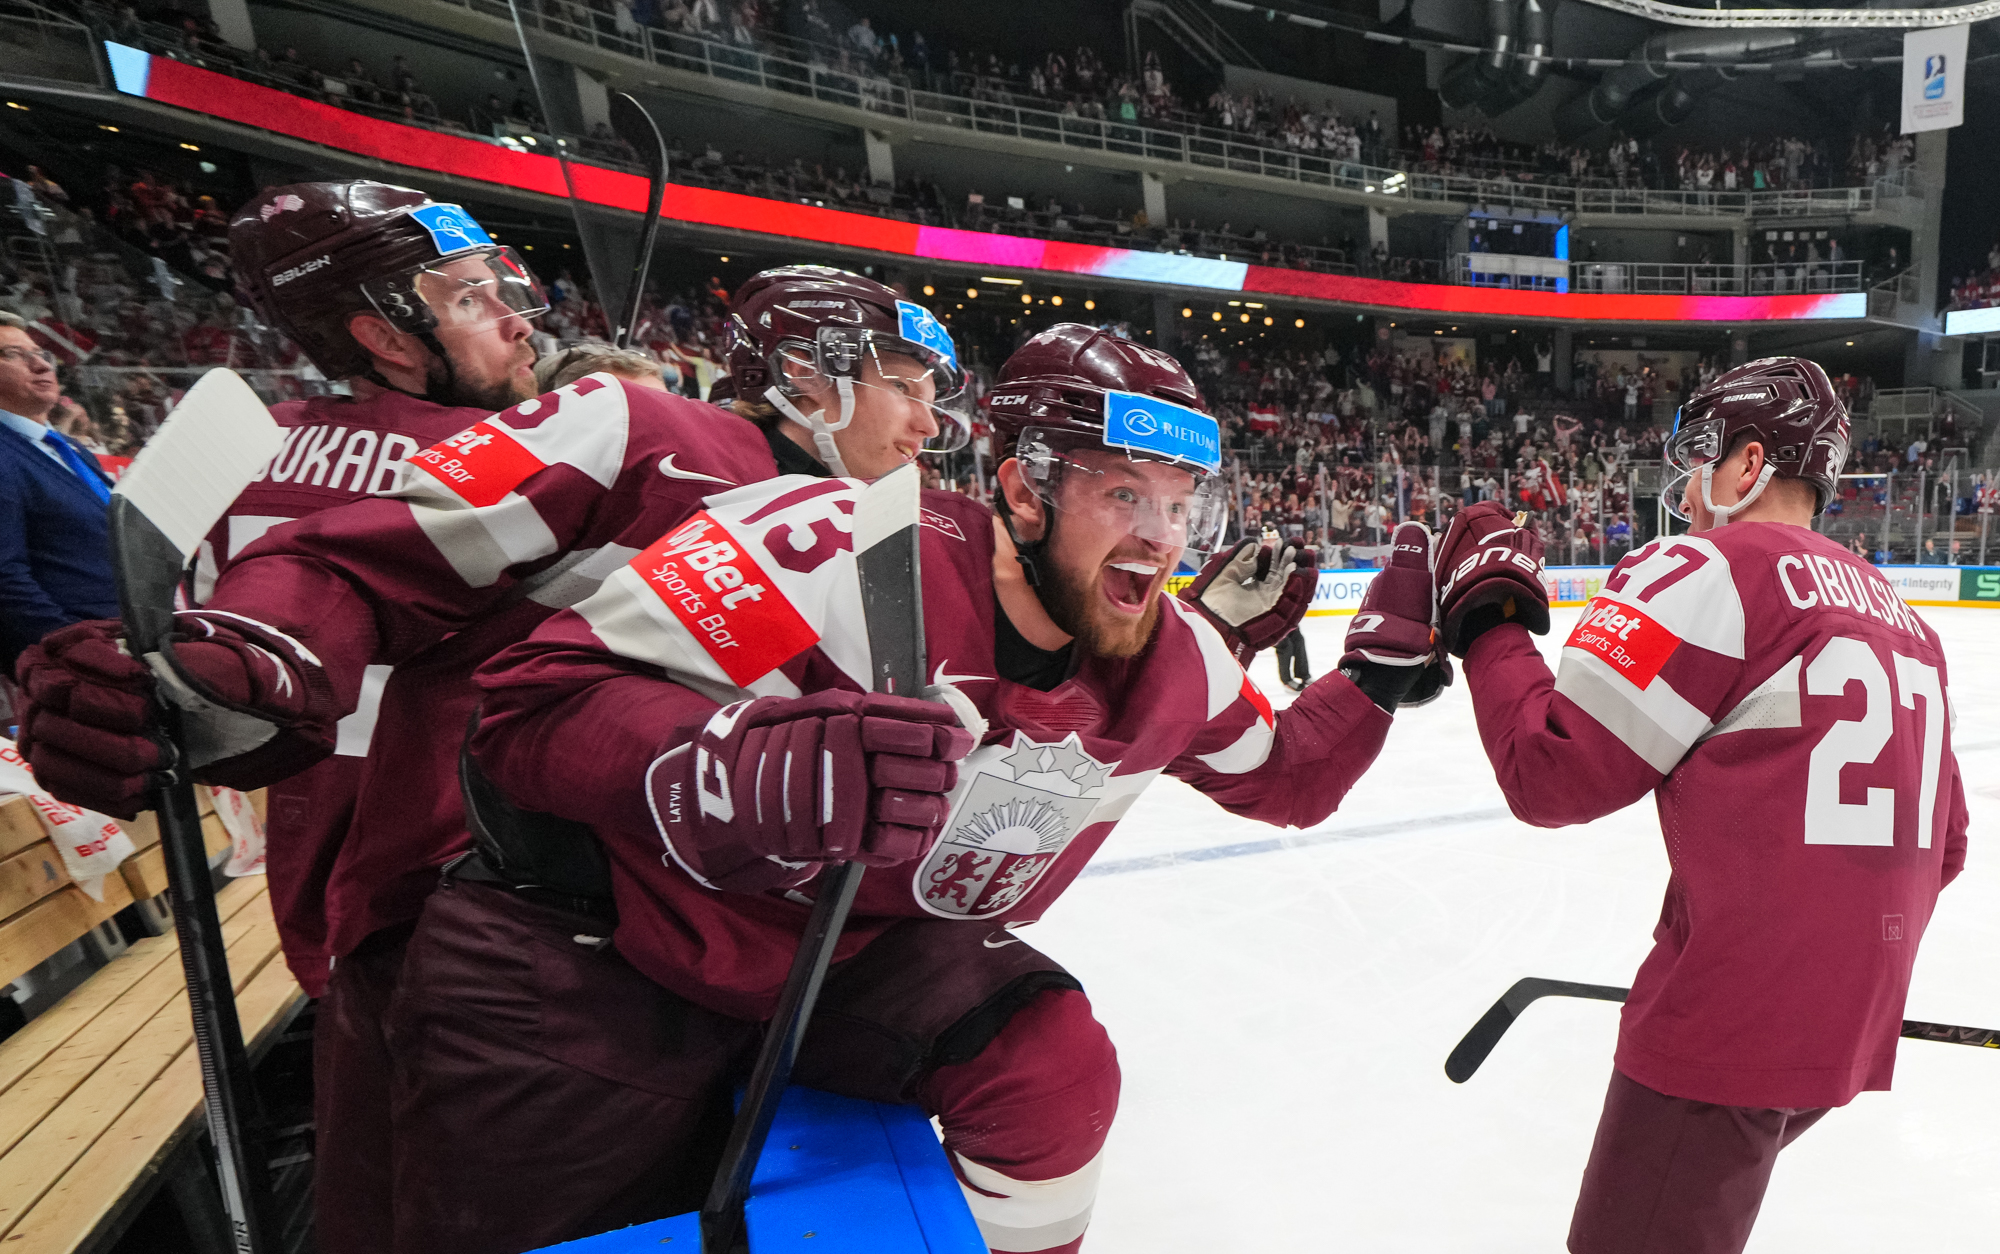 Czechs hand Latvia a heavy defeat at ice hockey worlds / Article